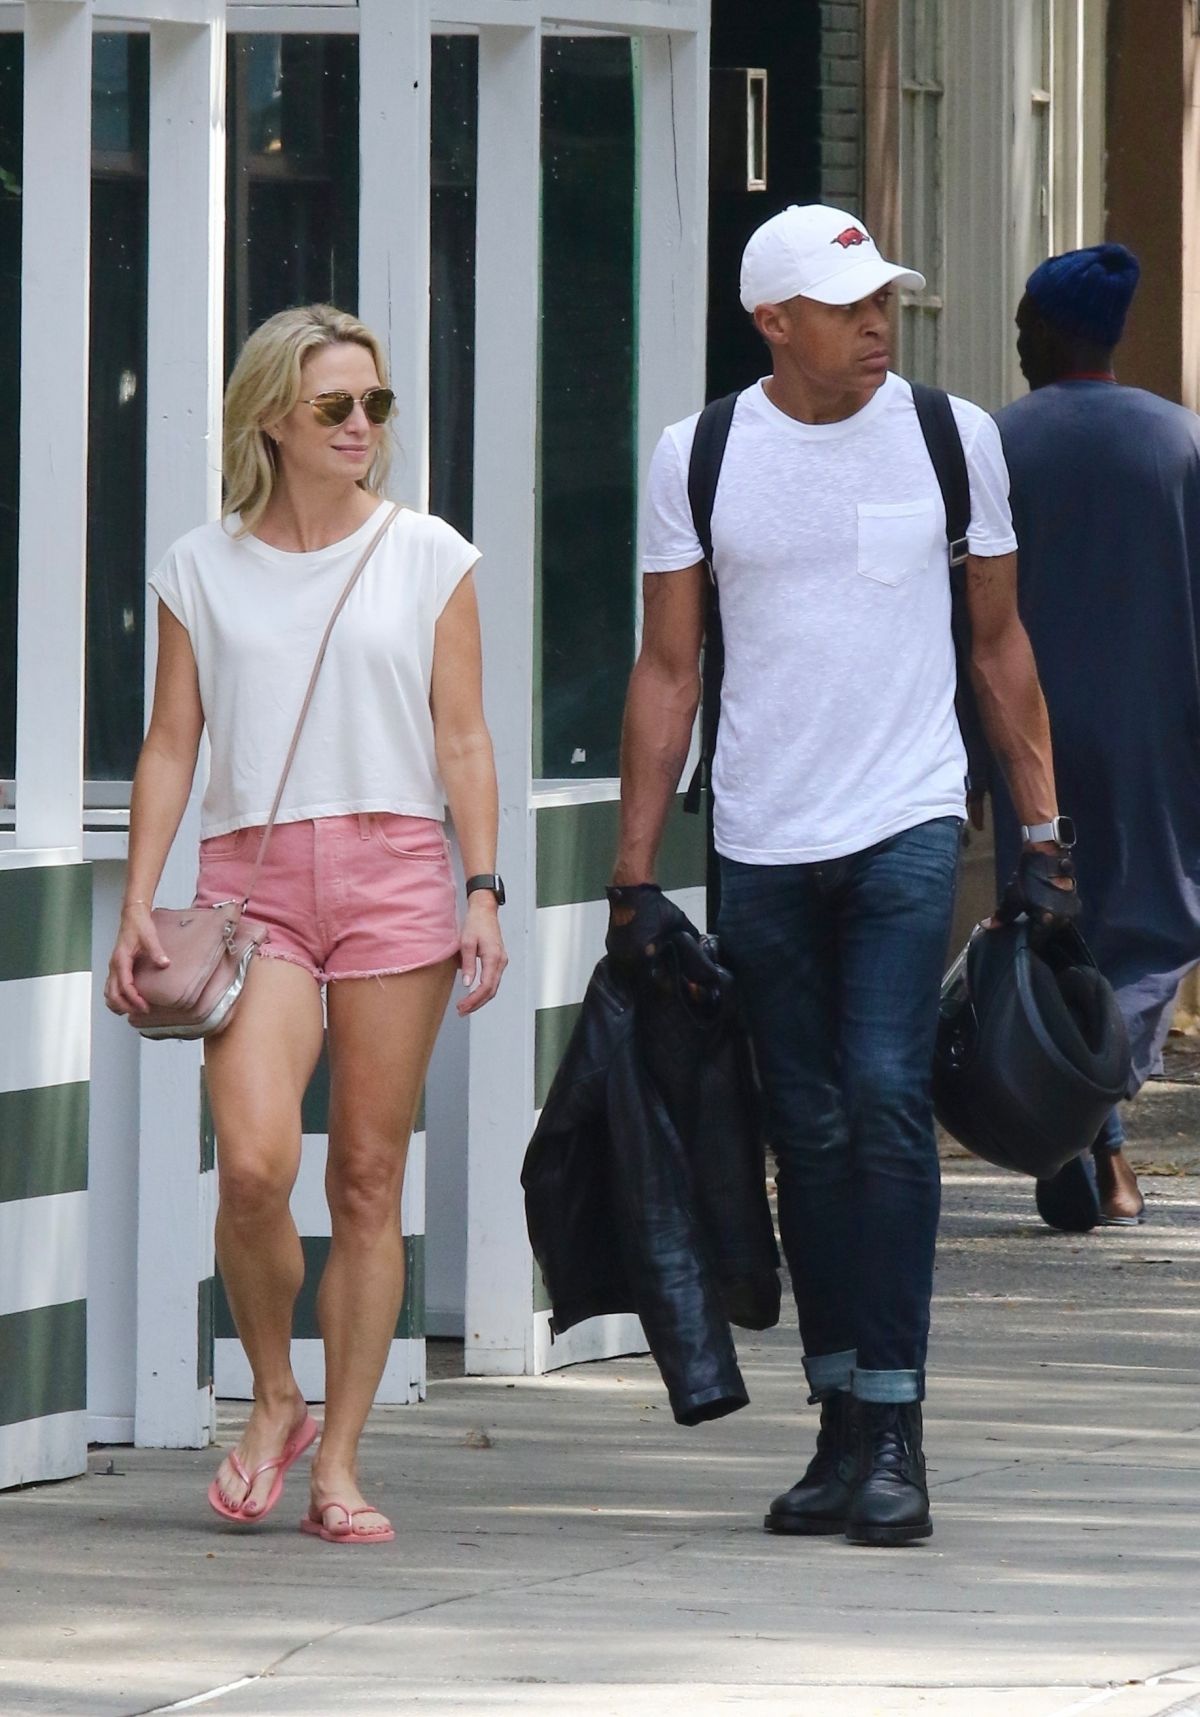 Amy Robach and T.J. Holmes: Enjoying a Day Out in New York